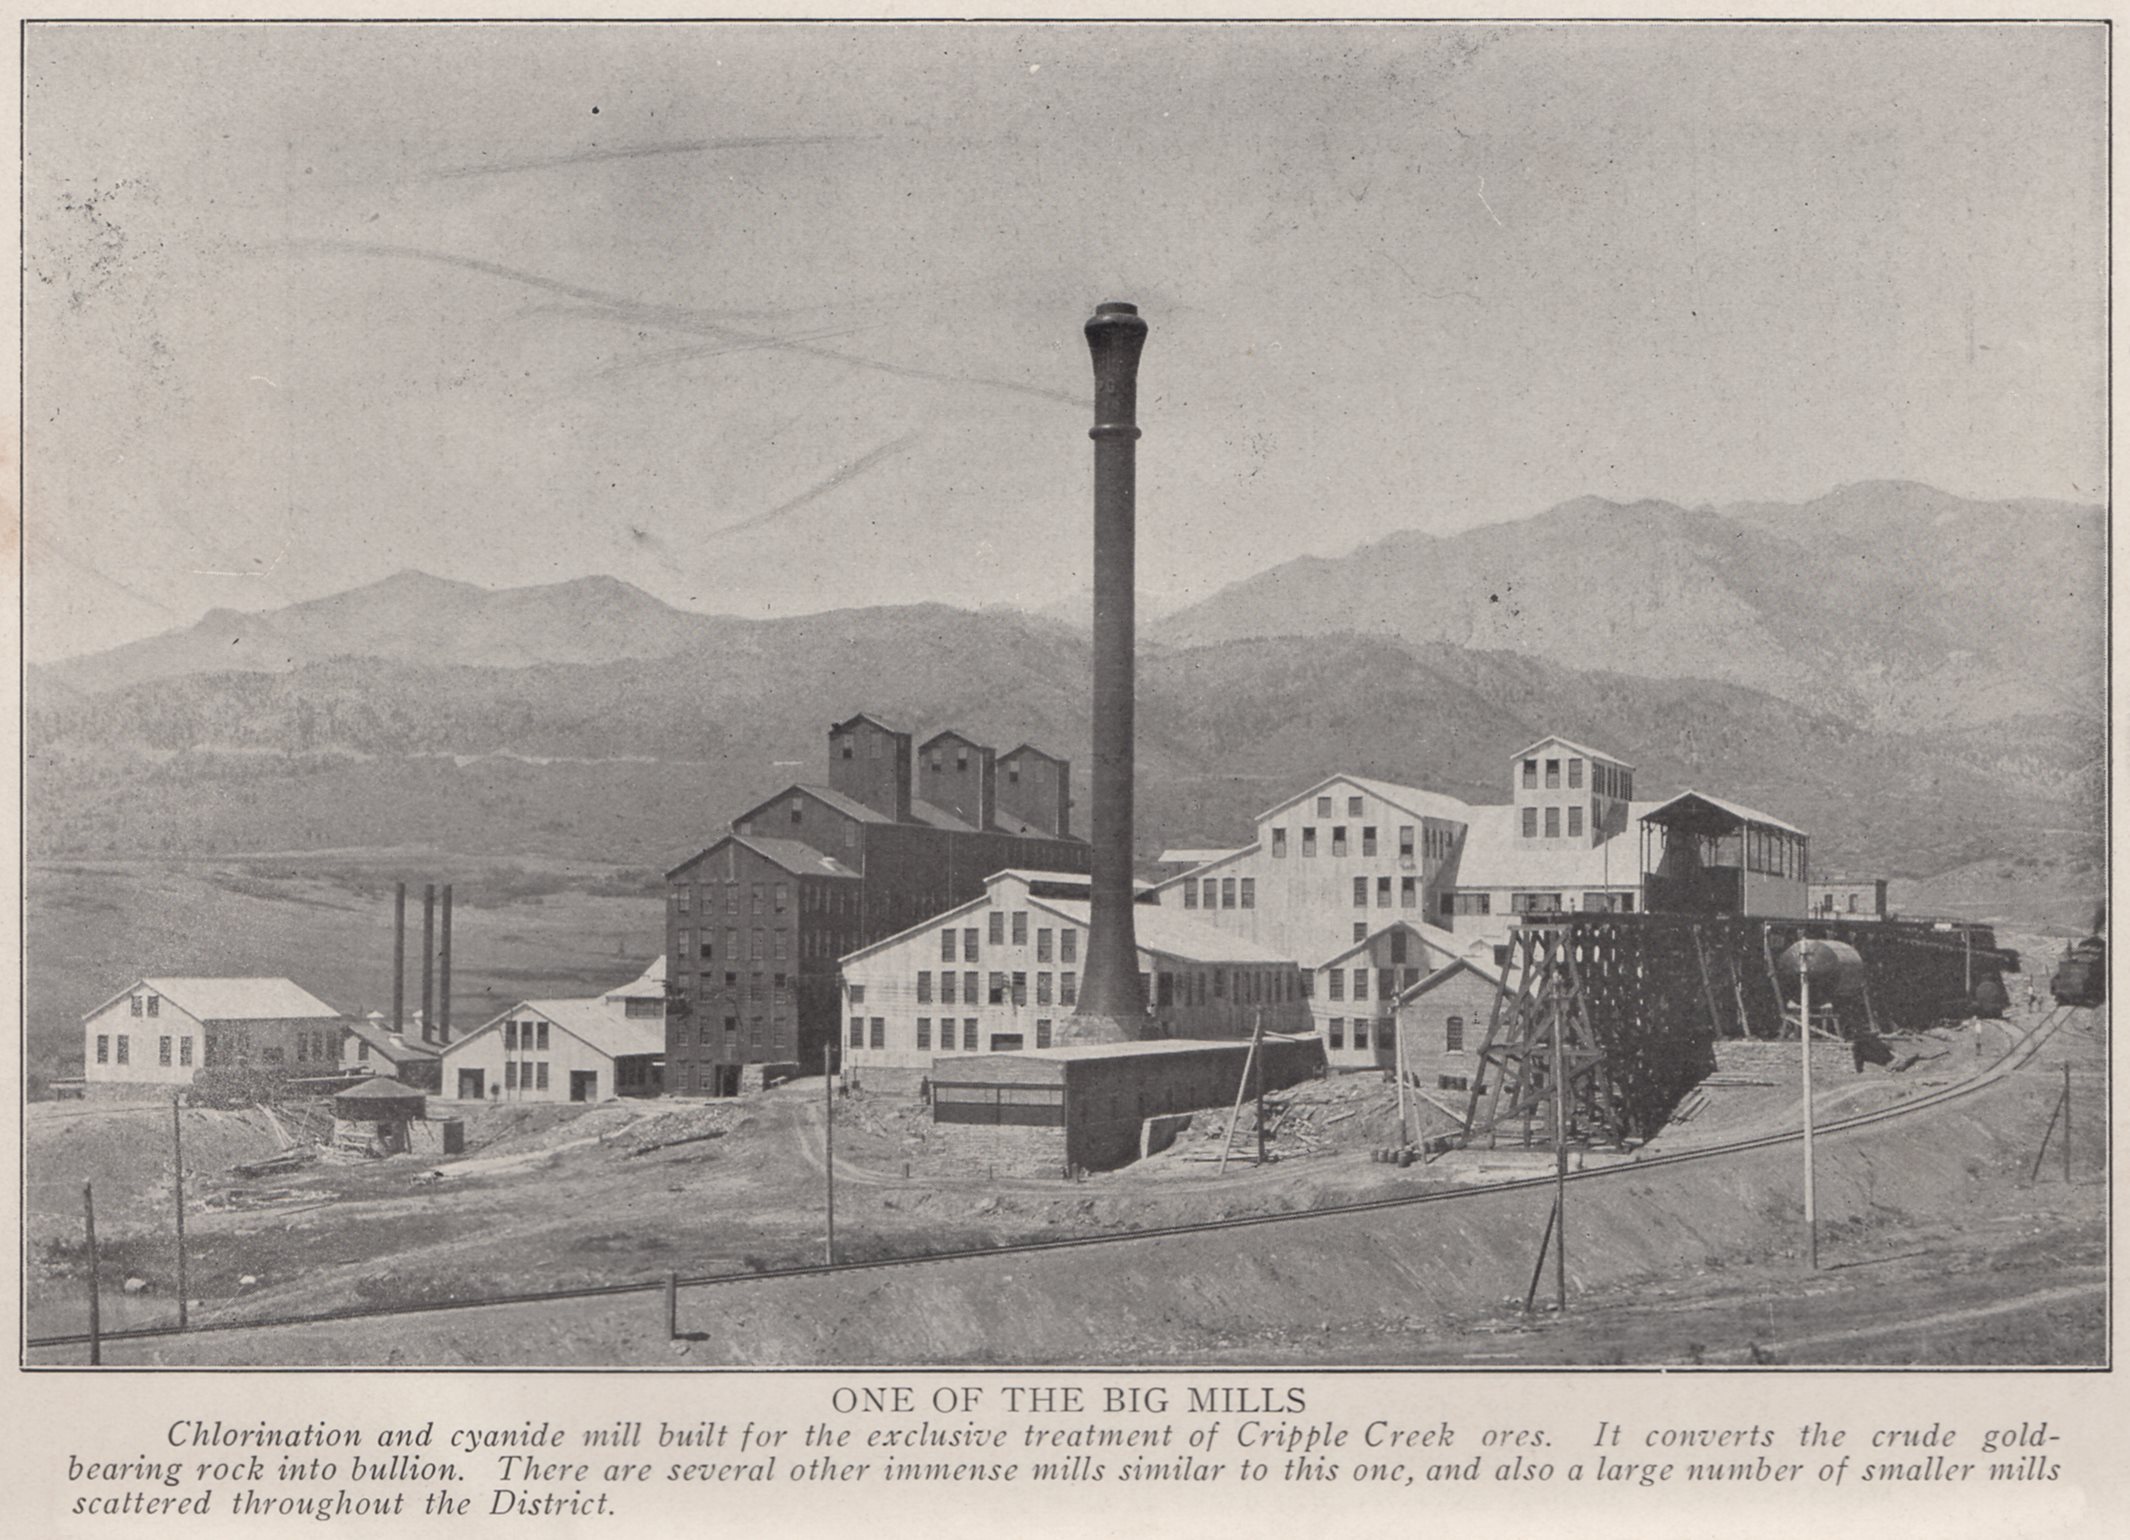 This is the large Portland Mill along the Short Line in Colorado Springs, built in 1902. It was a chlorination first, later also a cyanide mill built for the exclusive treatment of Cripple Creek ores. It converted the crude gold-bearing rock into bullion. The Mill closed in 1918, and as with the grade of the Short Line in this area, near impossible to find any traces of it judging from aerial photos I've seen.